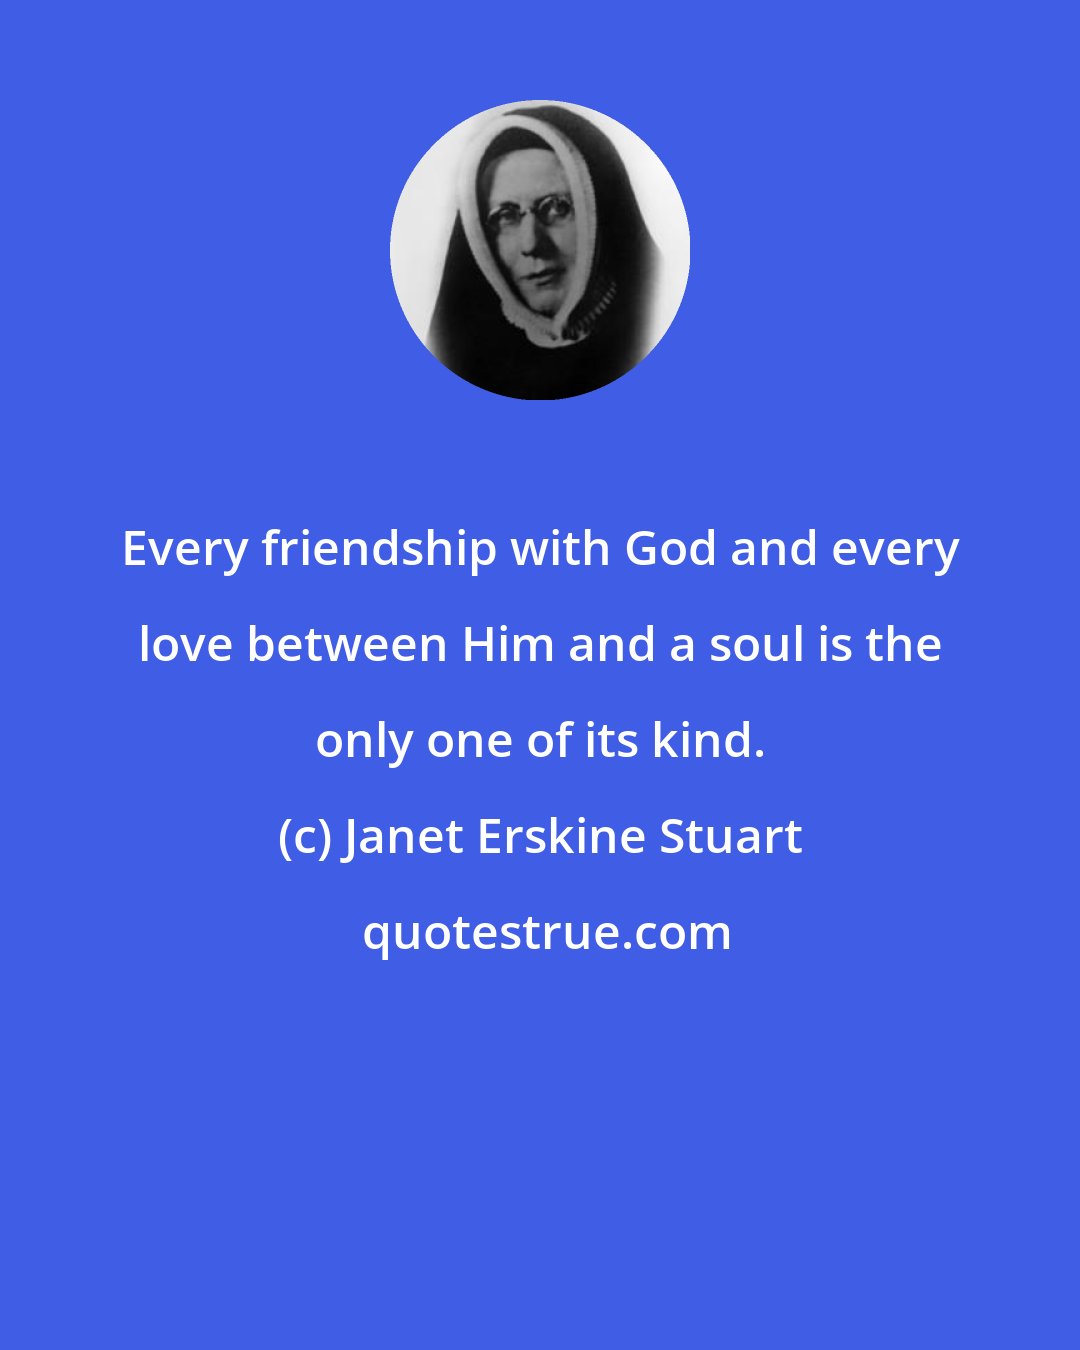 Janet Erskine Stuart: Every friendship with God and every love between Him and a soul is the only one of its kind.